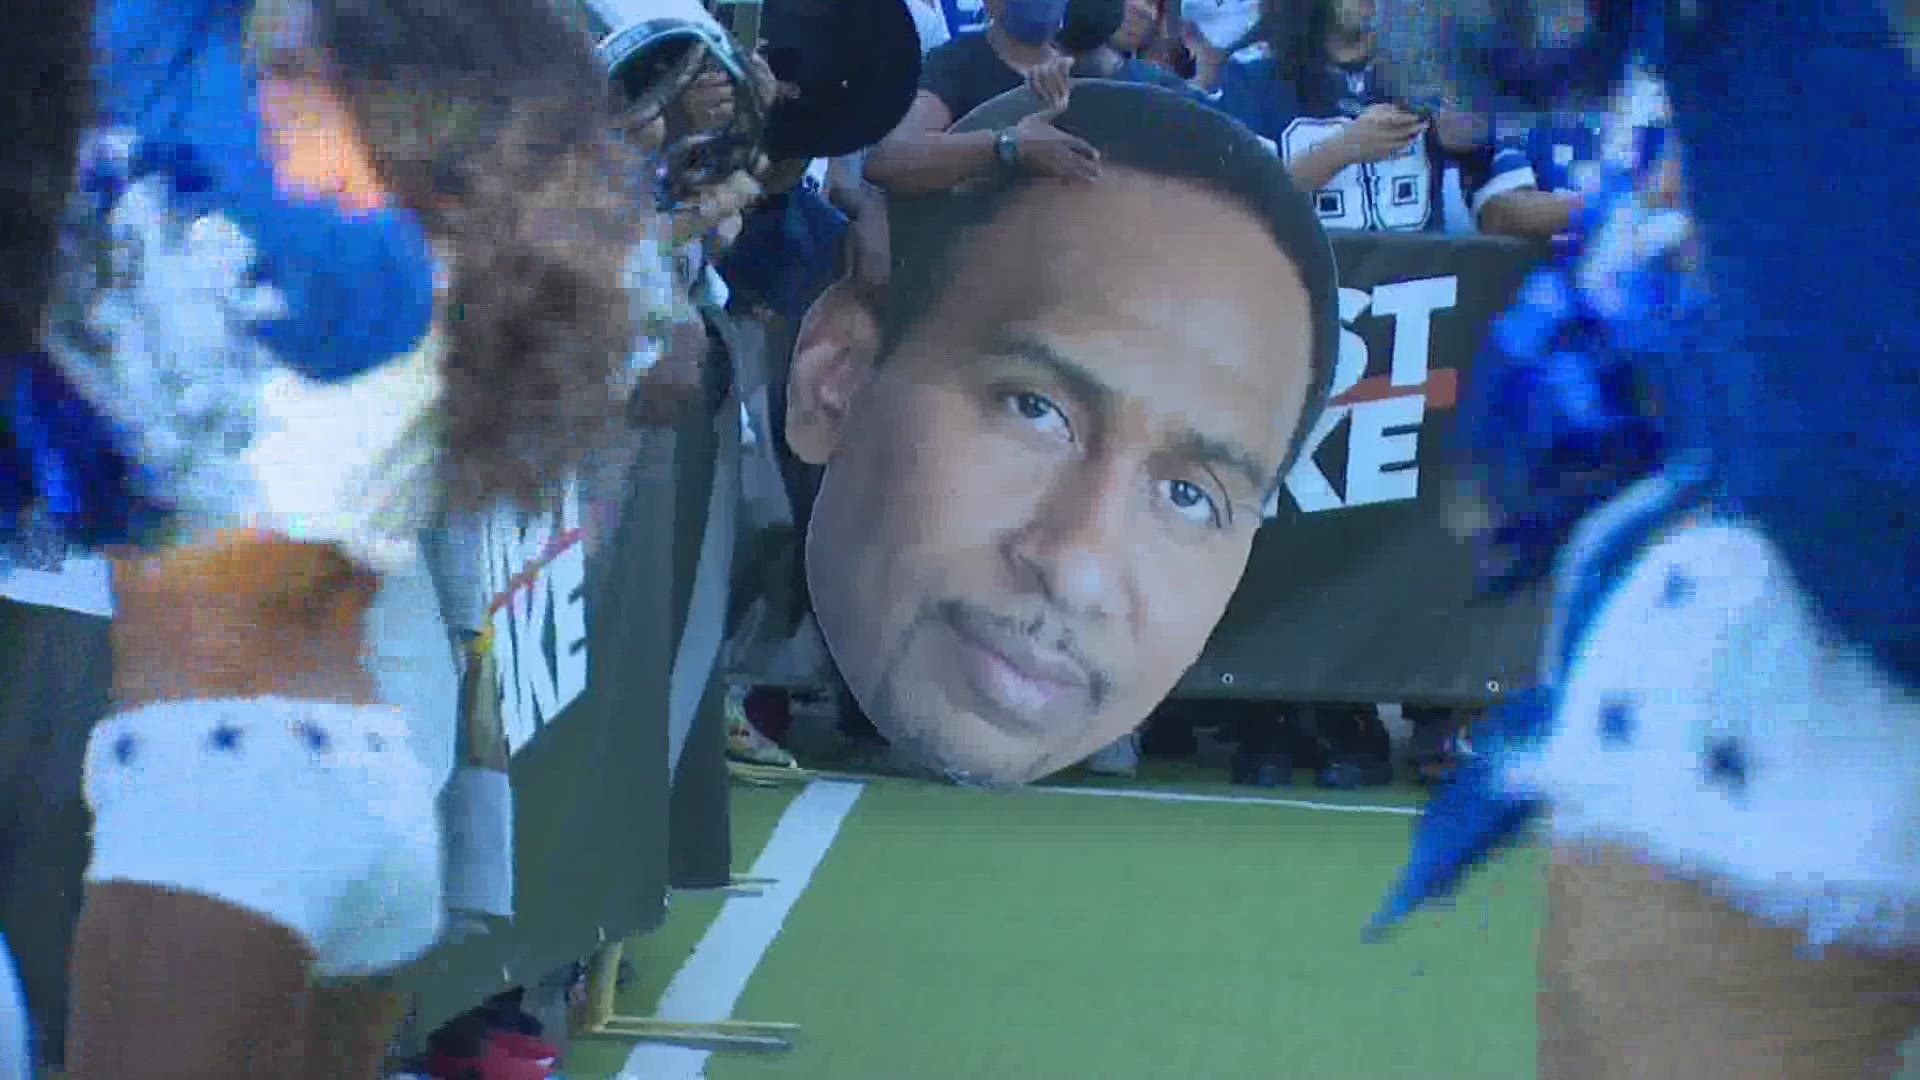 The #1 Cowboys hater Stephen A. Smith did not get a warm Texas welcome at The Star in Frisco Thursday.